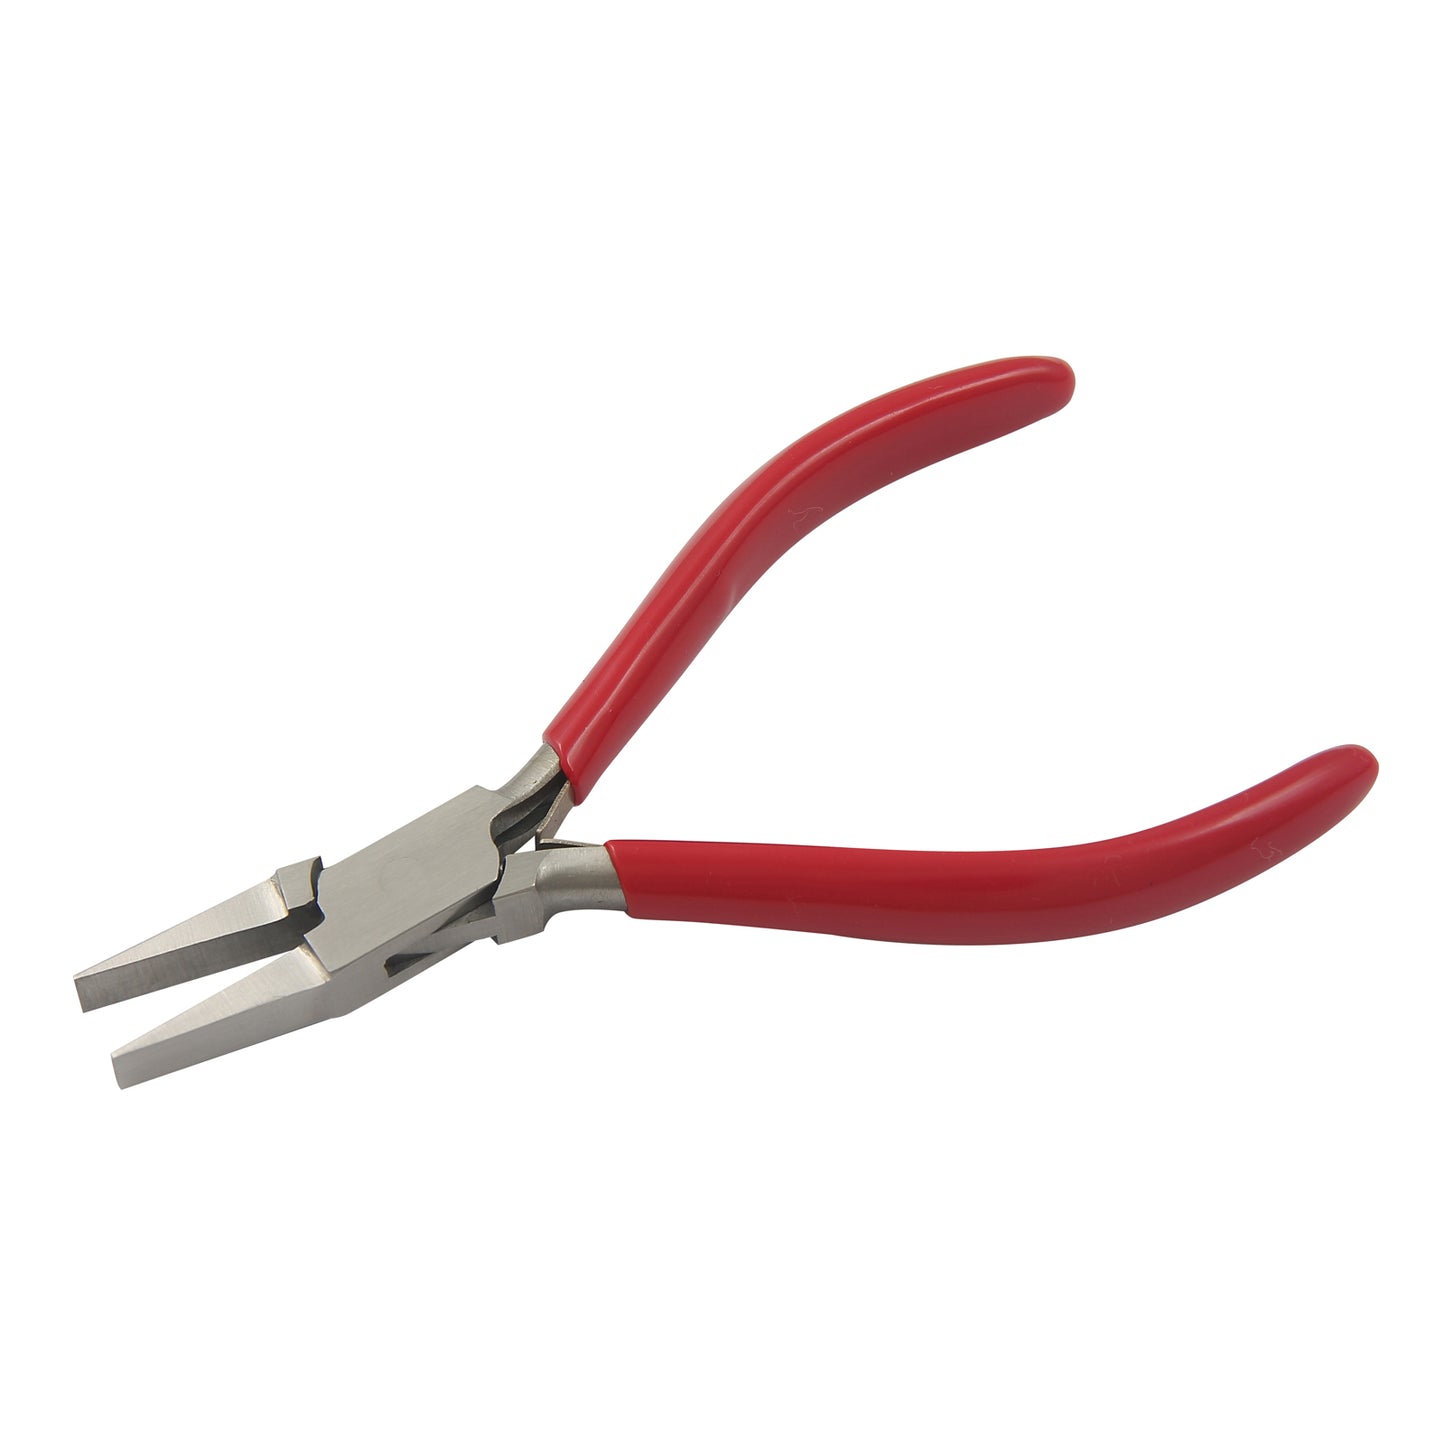 Chain nose plier size: 130mm smooth jaws, with double leaf spring & PVC handles